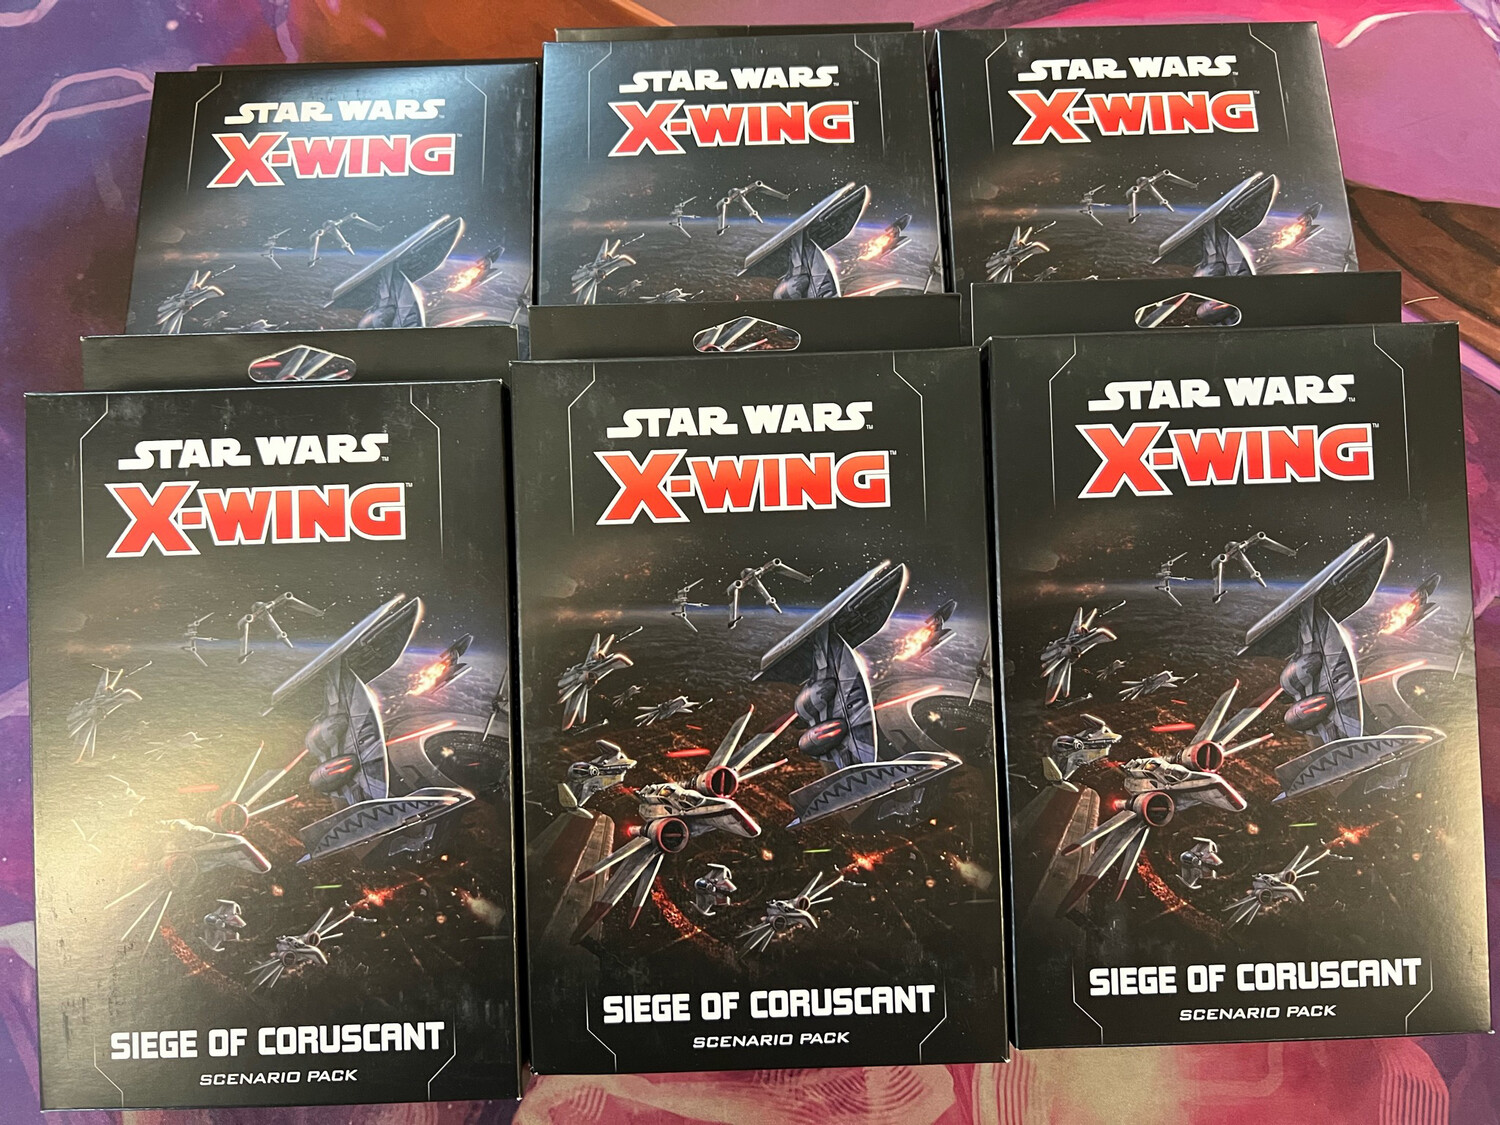 STAR WARS X-WING 2ND ED: SIEGE OF CORUSCANT BATTLE PACK